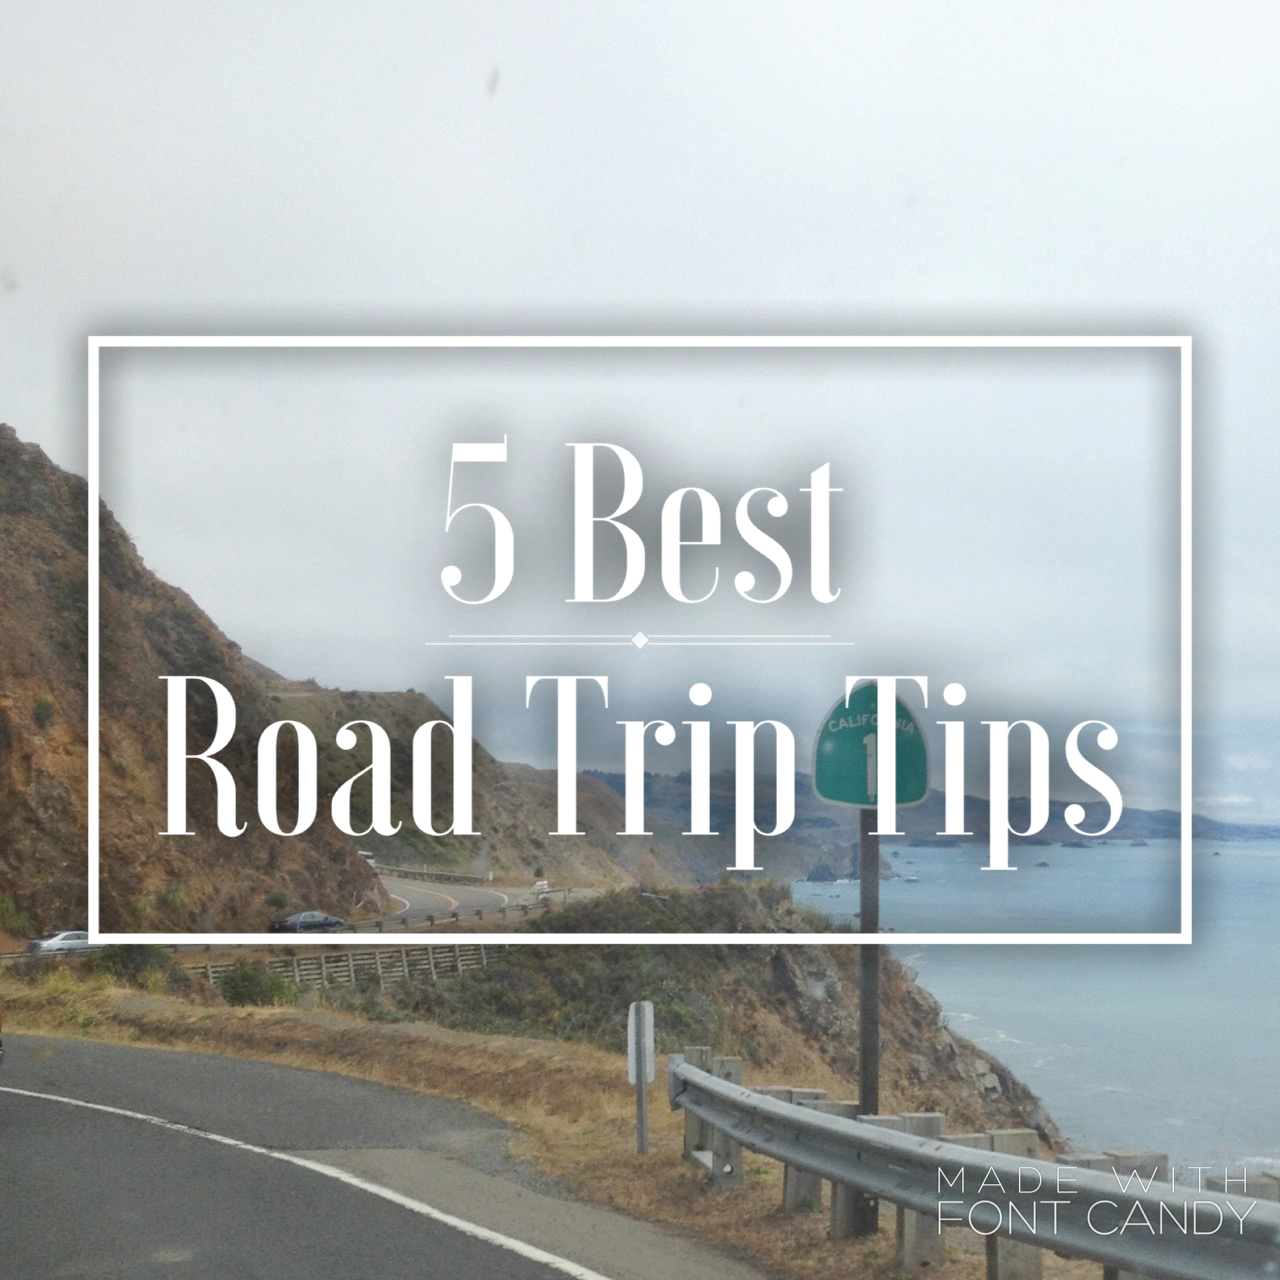 Road Trippin’ Tips